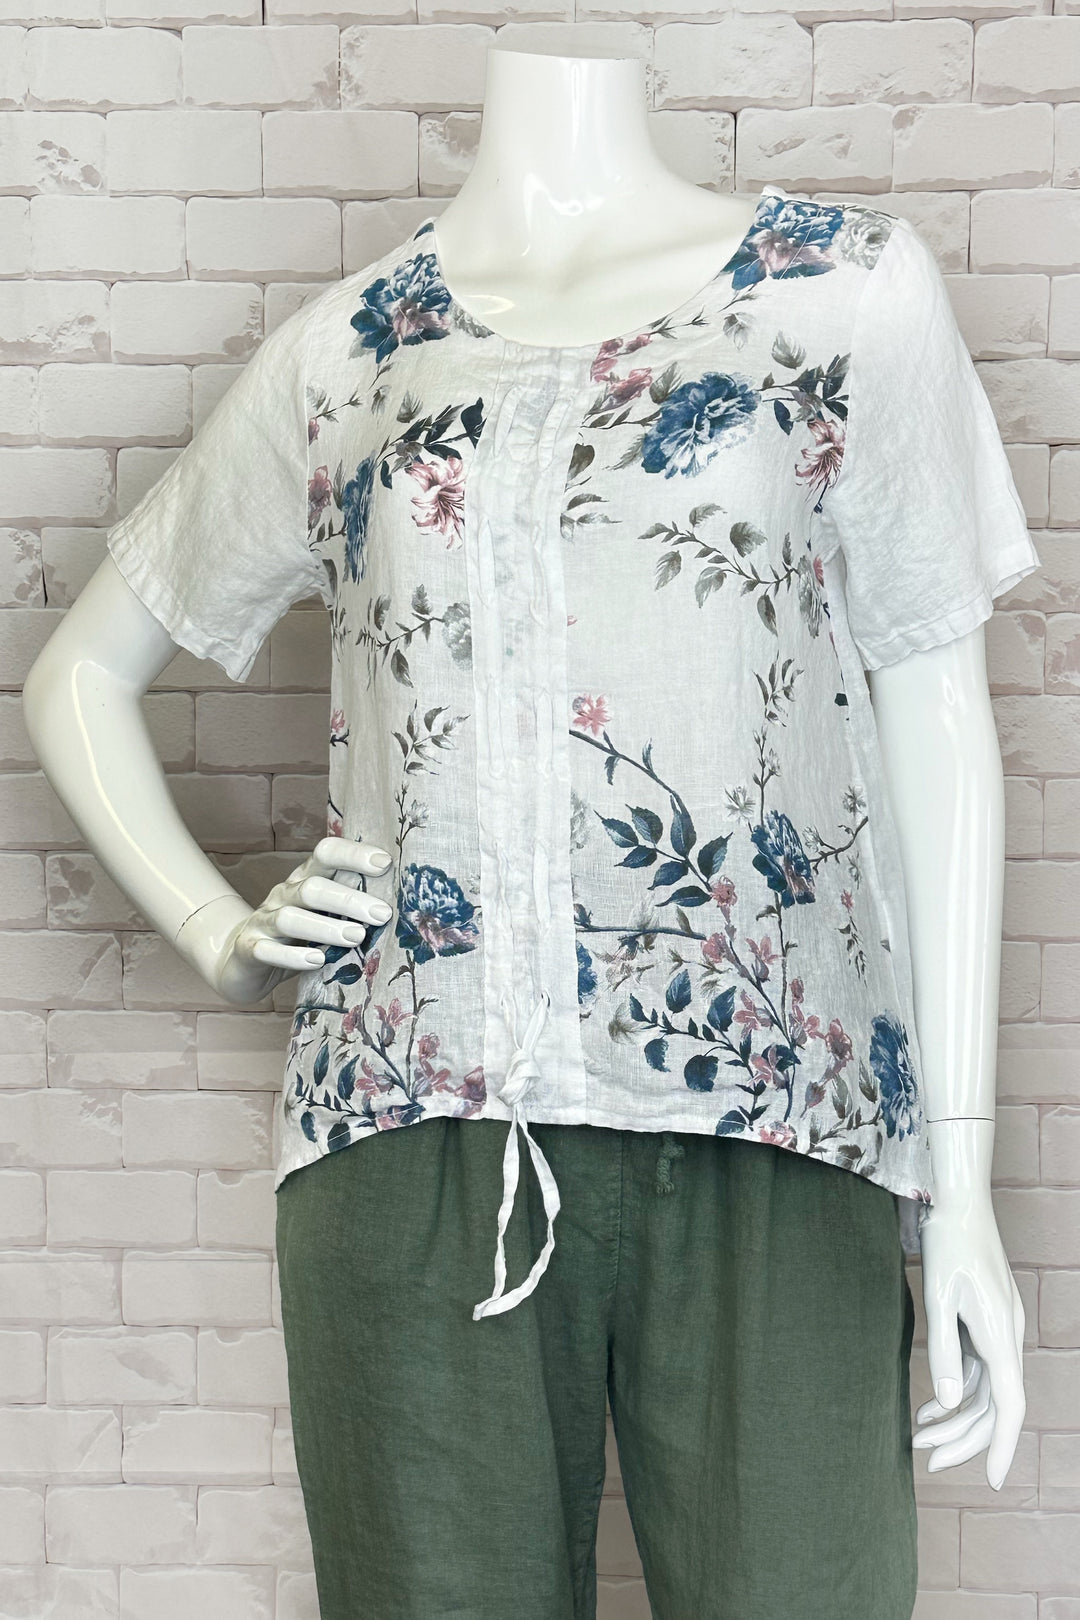 CHERISHH Spring 2024 This lovely top features a colourful floral print and short sleeves design, perfect for warmer weather. With a front drawstring, it's both stylish and comfortable